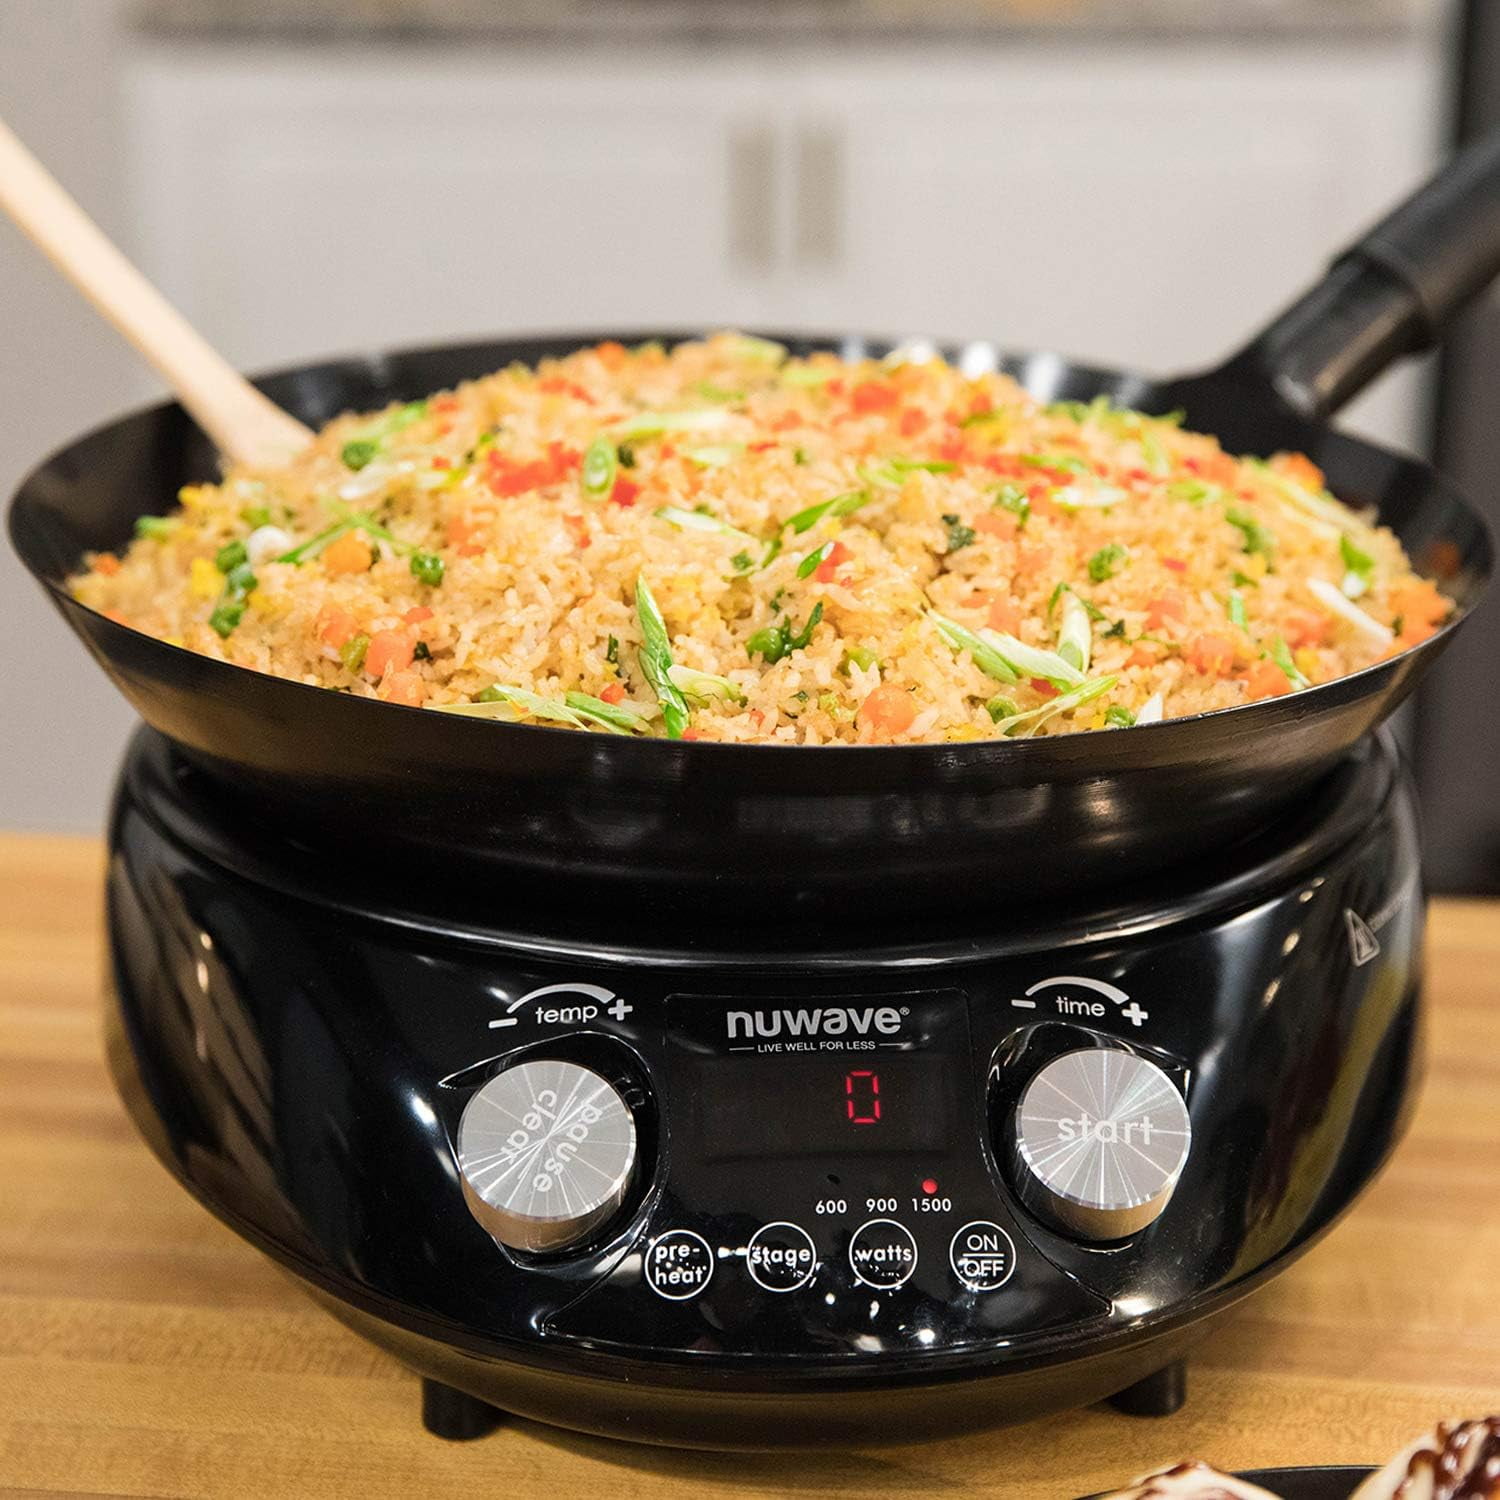 NuWave Induction Cooktop Wok, 3 Wattage 600, 900 & 1500 Induction